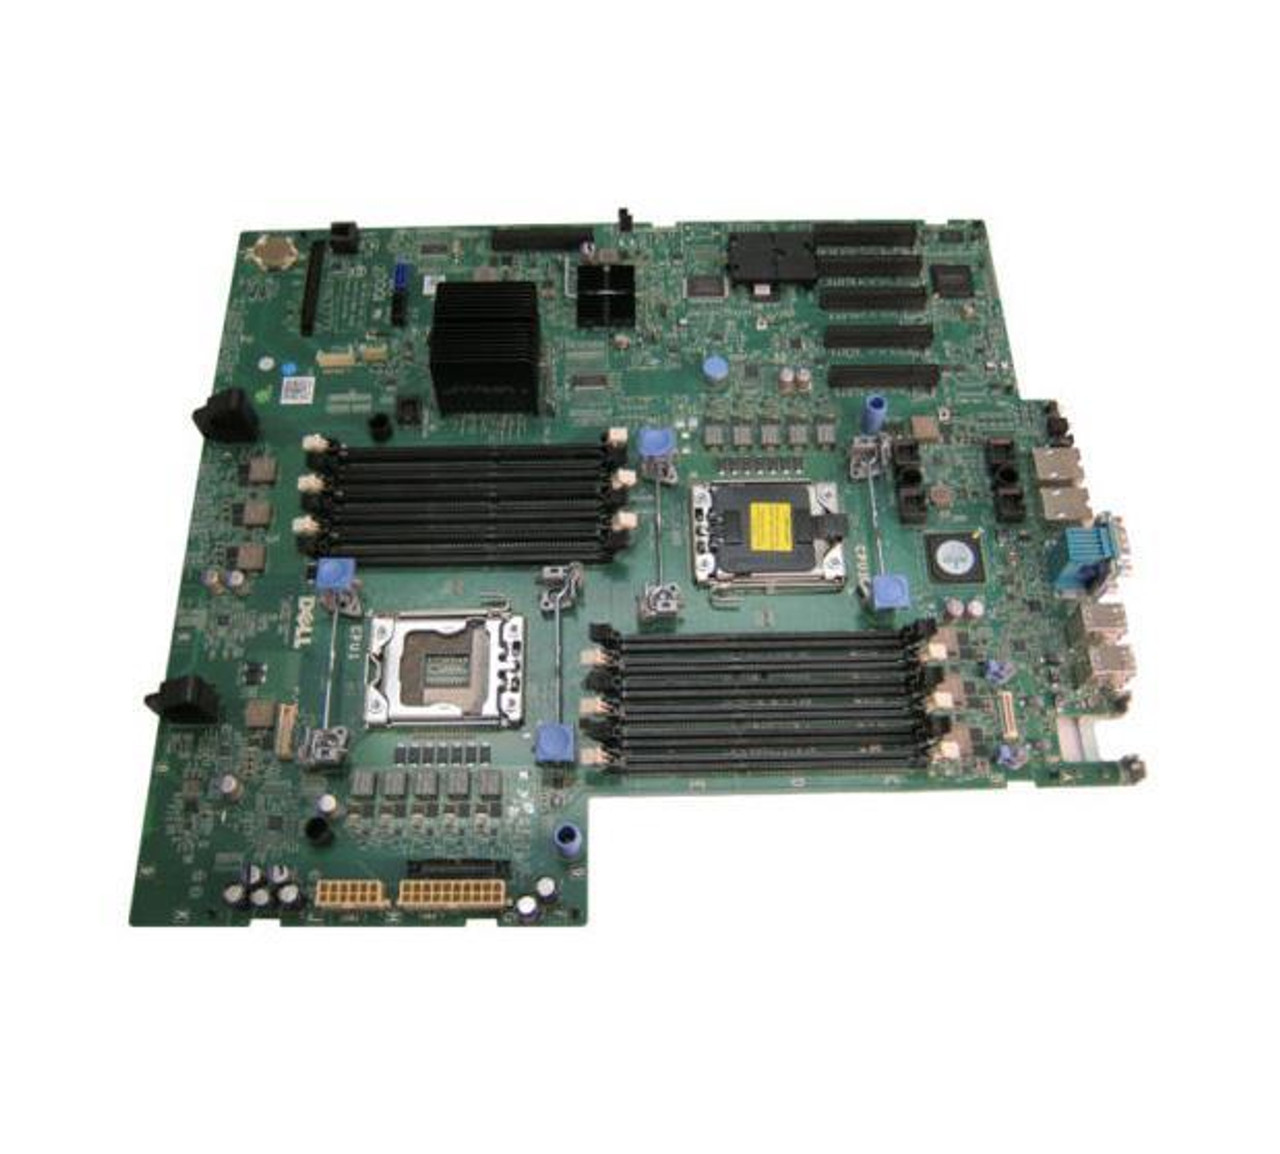 03W53D Dell System Board (Motherboard) for PowerEdge T610 Server (Refurbished)